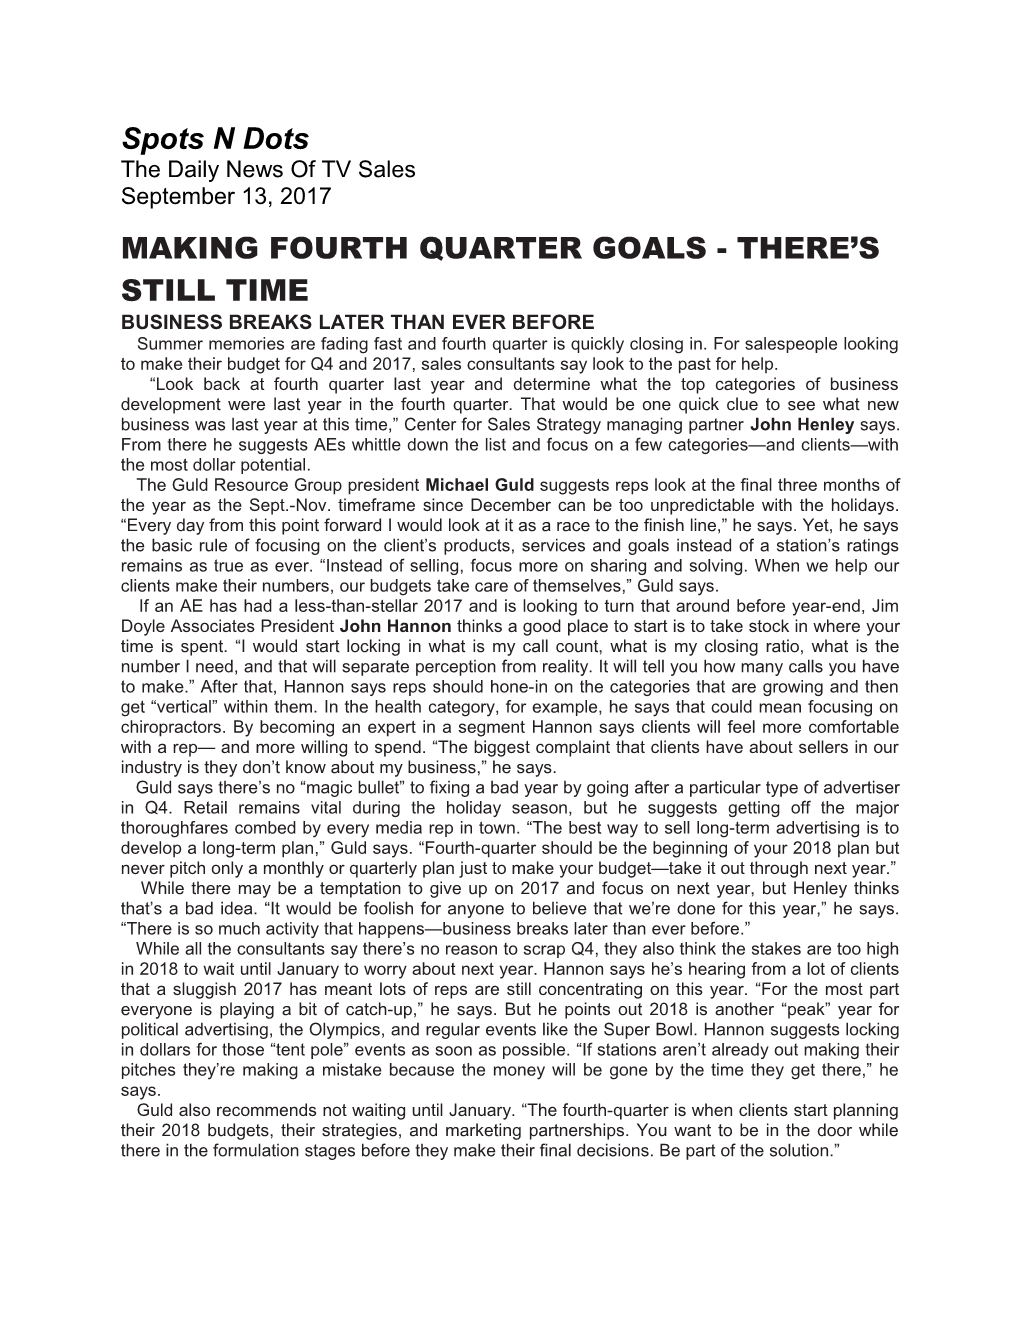 Making Fourth Quarter Goals - There S Still Time